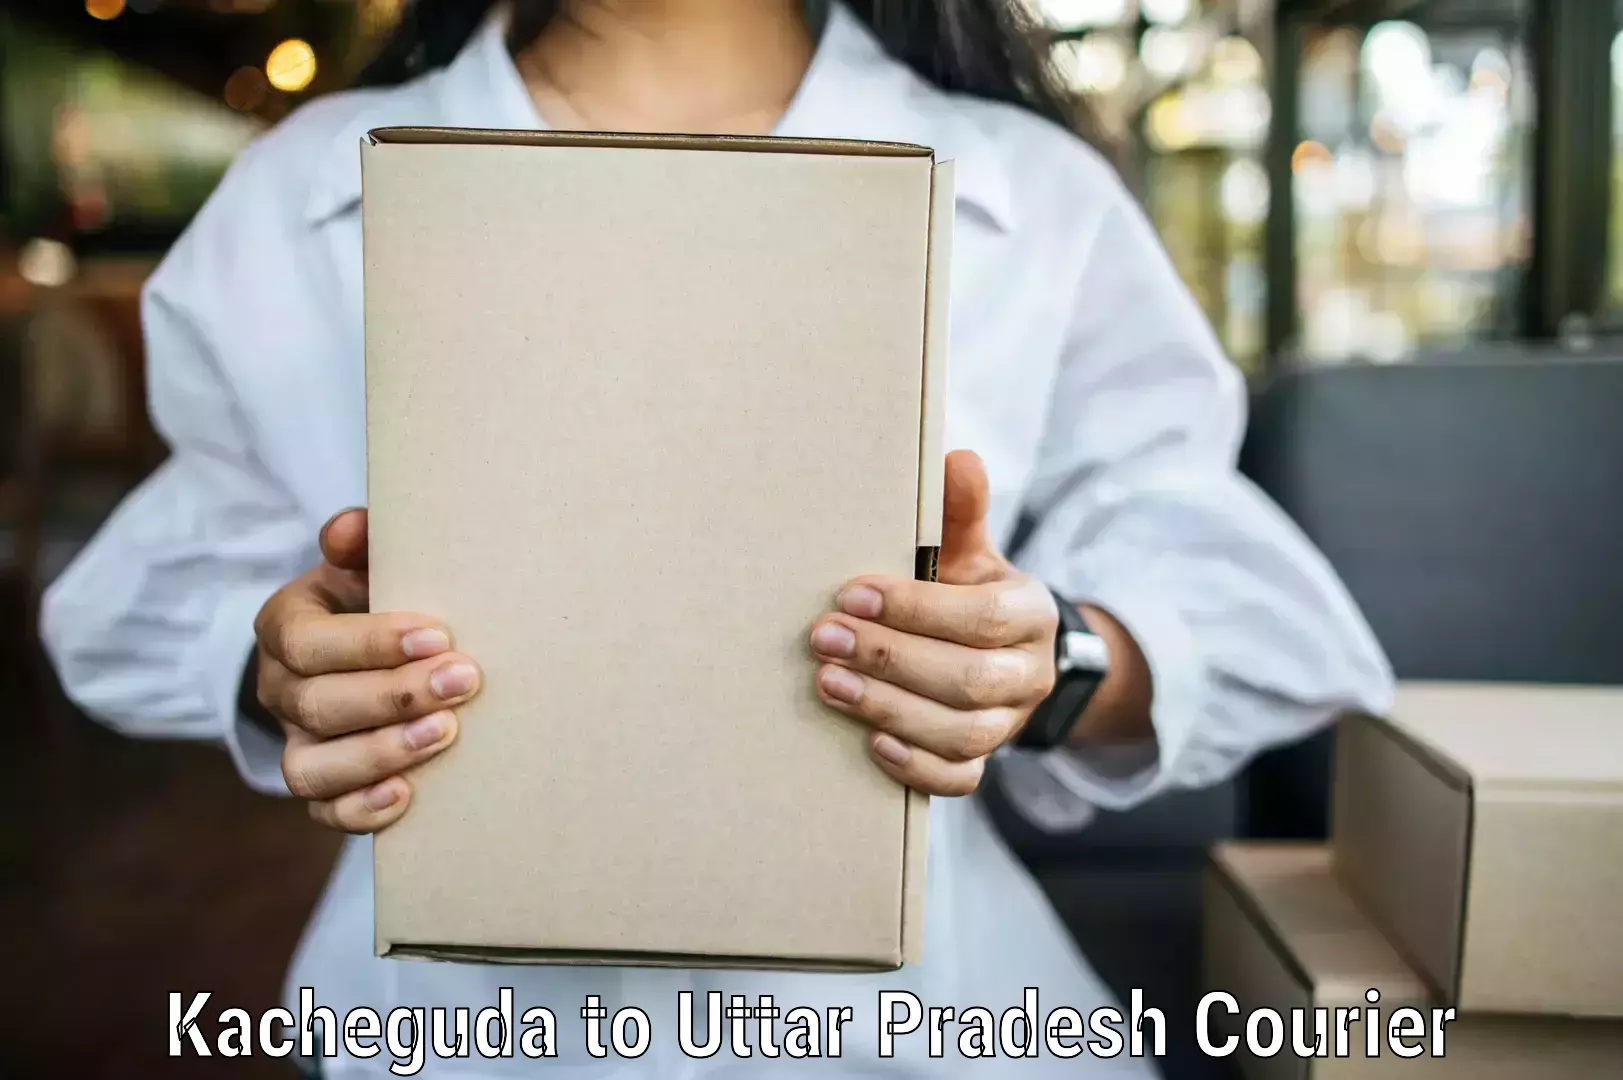 Large package courier Kacheguda to IIIT Lucknow